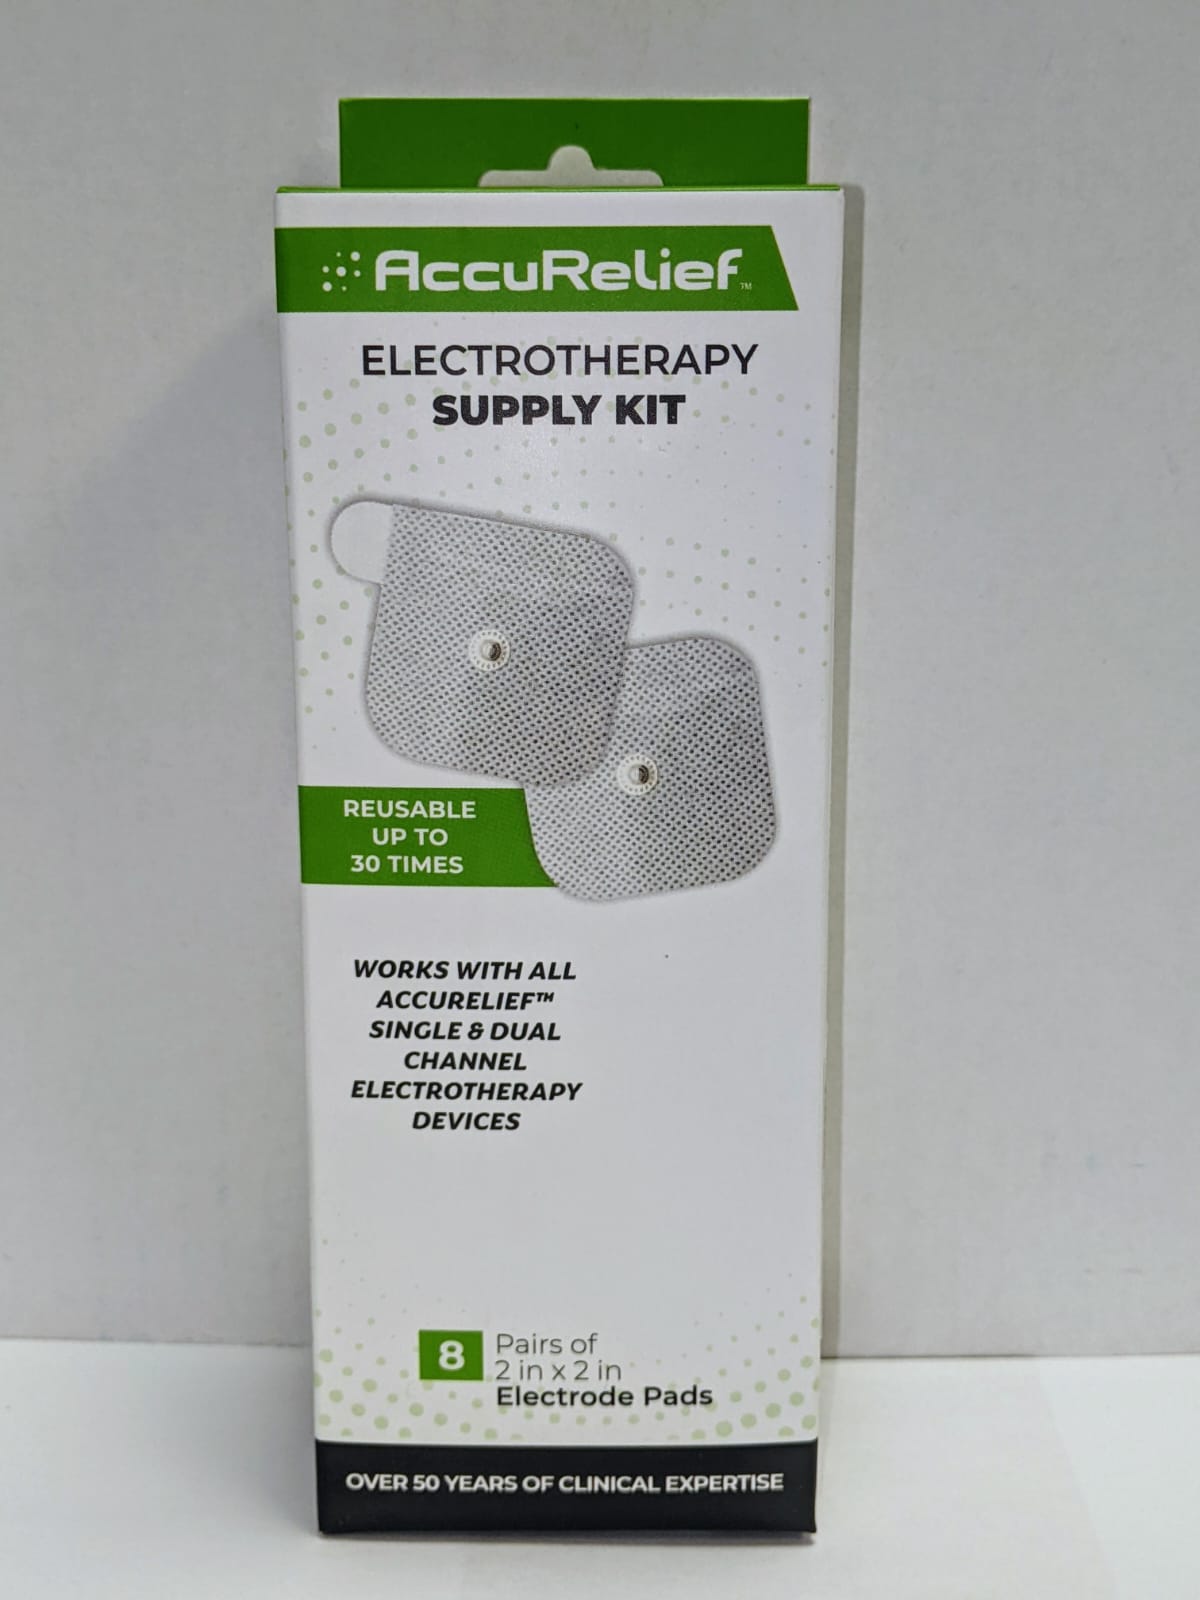 AccuRelief, Electrotherapy Supply Kit. Reuseable up to 30 times. Works with all Accurelief single and dual channel electrotherapy devices. 8 pairs of 2in by 2in electrode pads. Over 50 years of clinical expertise.